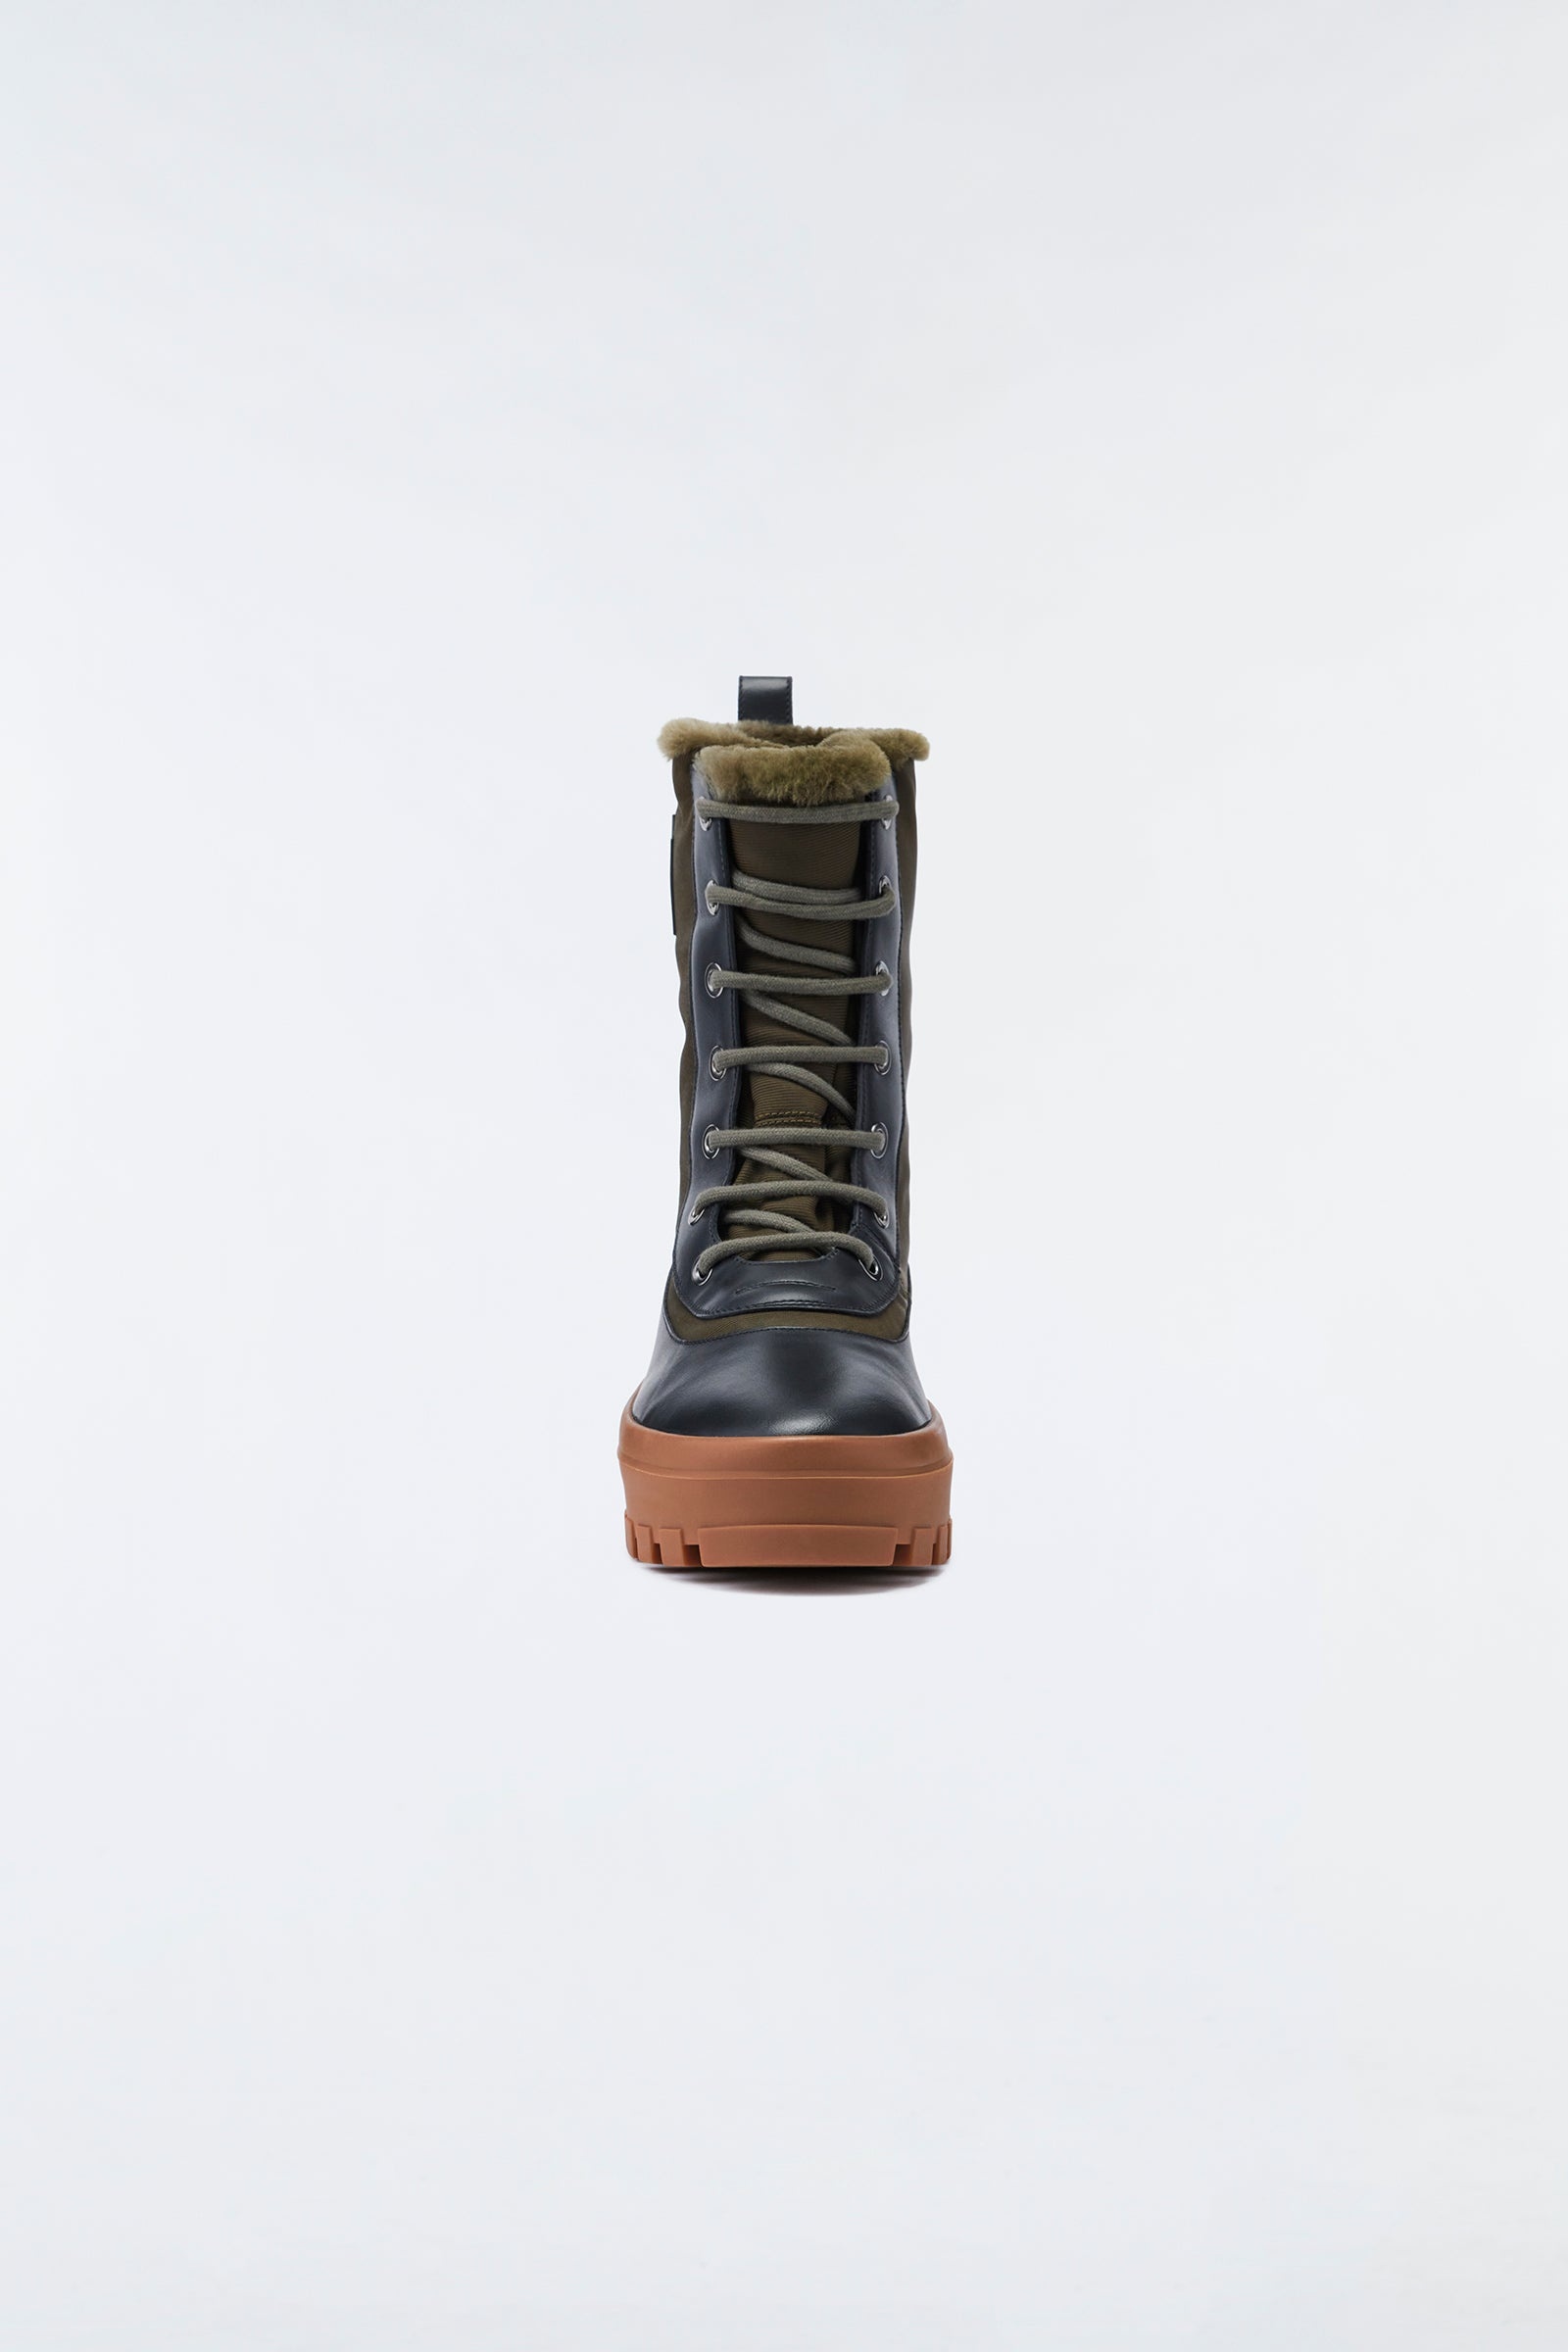 HERO shearling-lined winter boot for men - 3